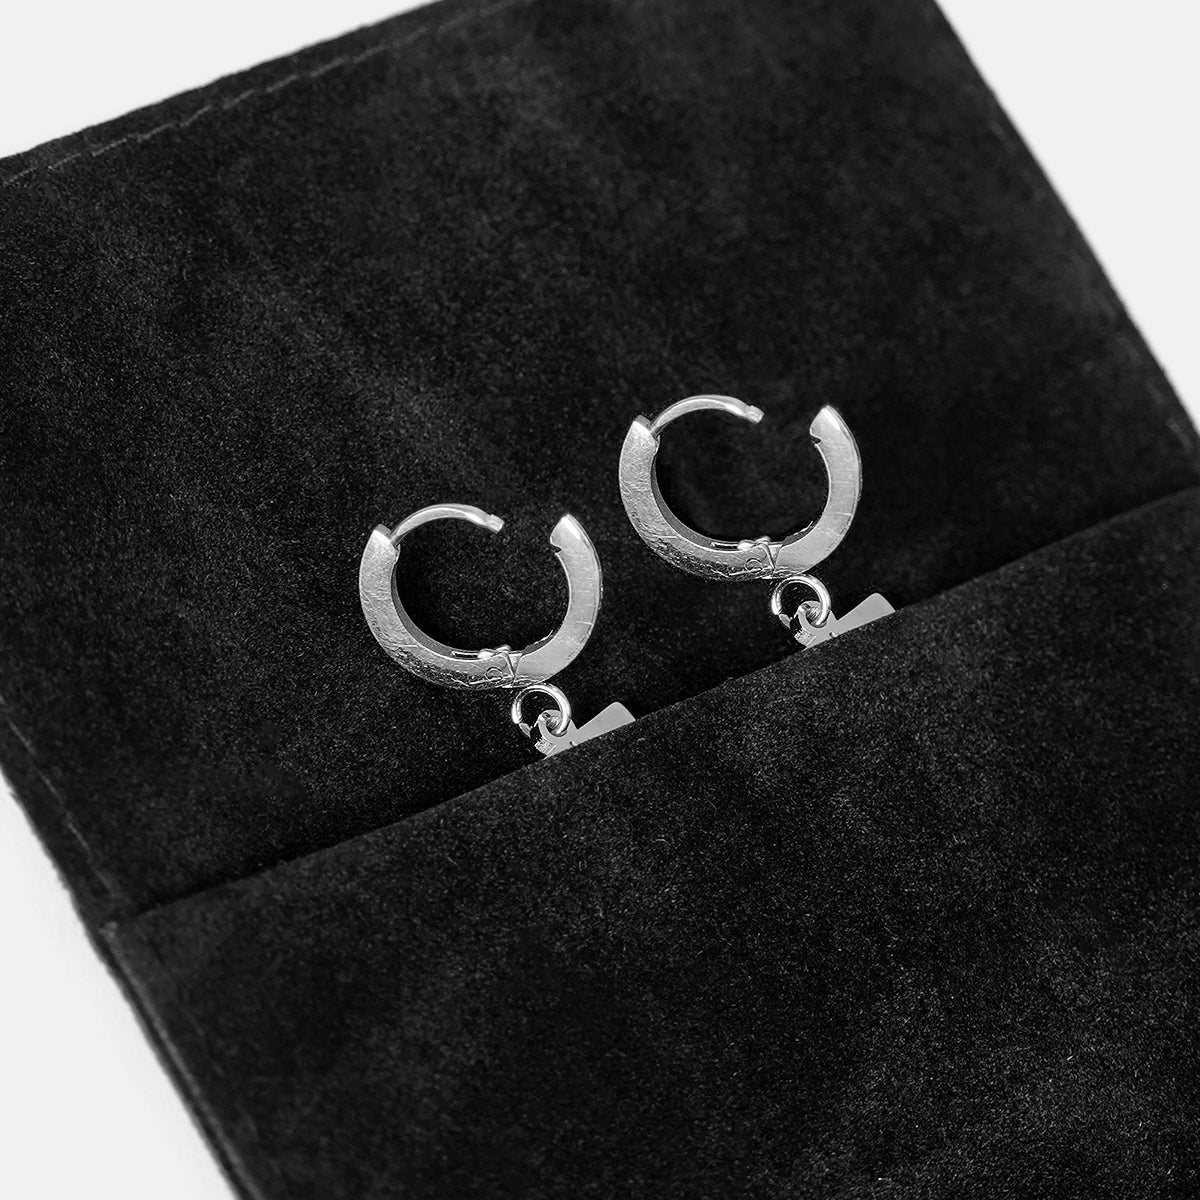 20 Number Earring - Stainless Steel